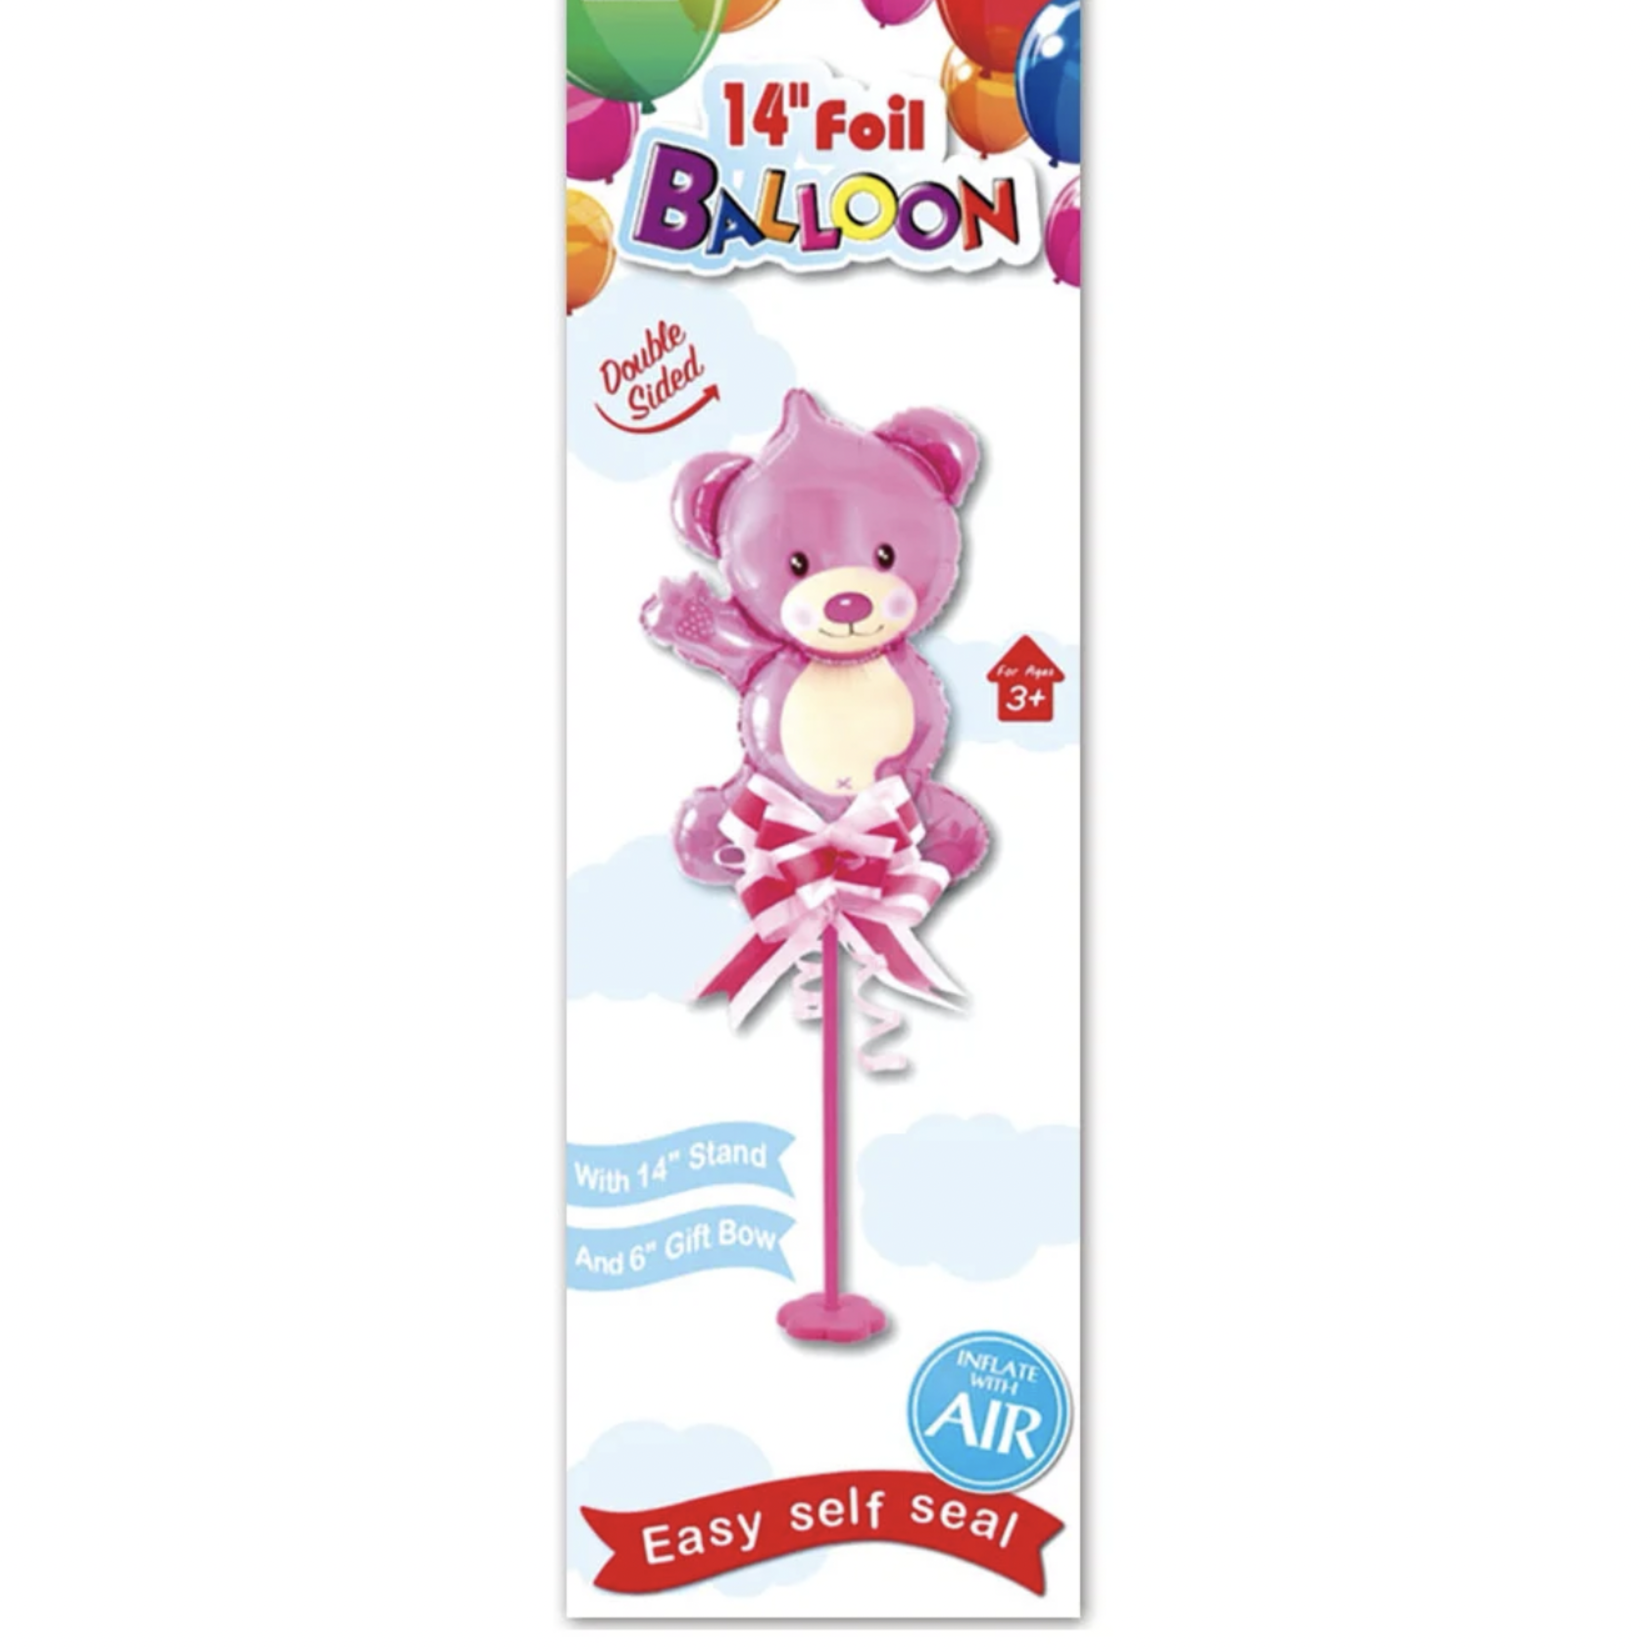 14'' FOIL BALLOON PINK BEAR ON STAND